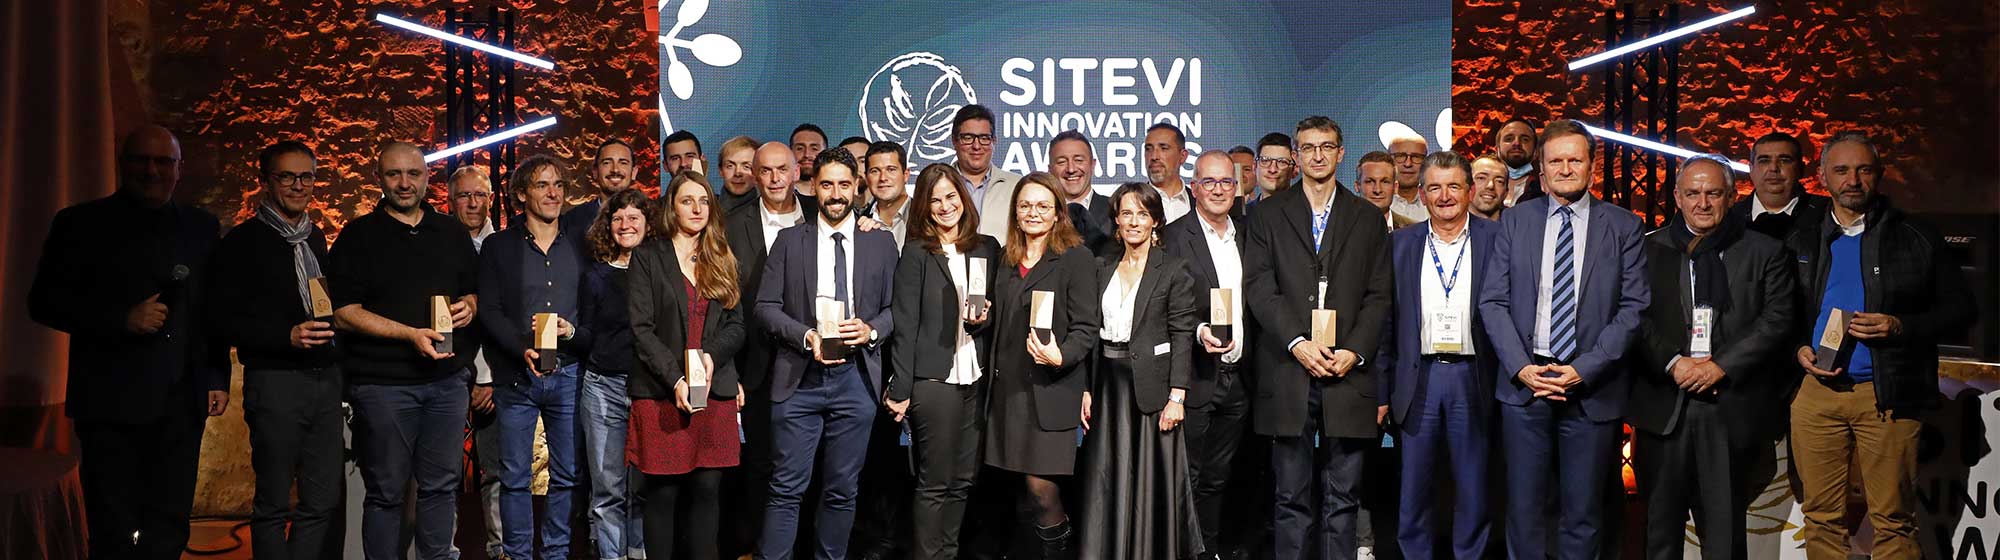 Group photo of the SITEVI Innovation Awards